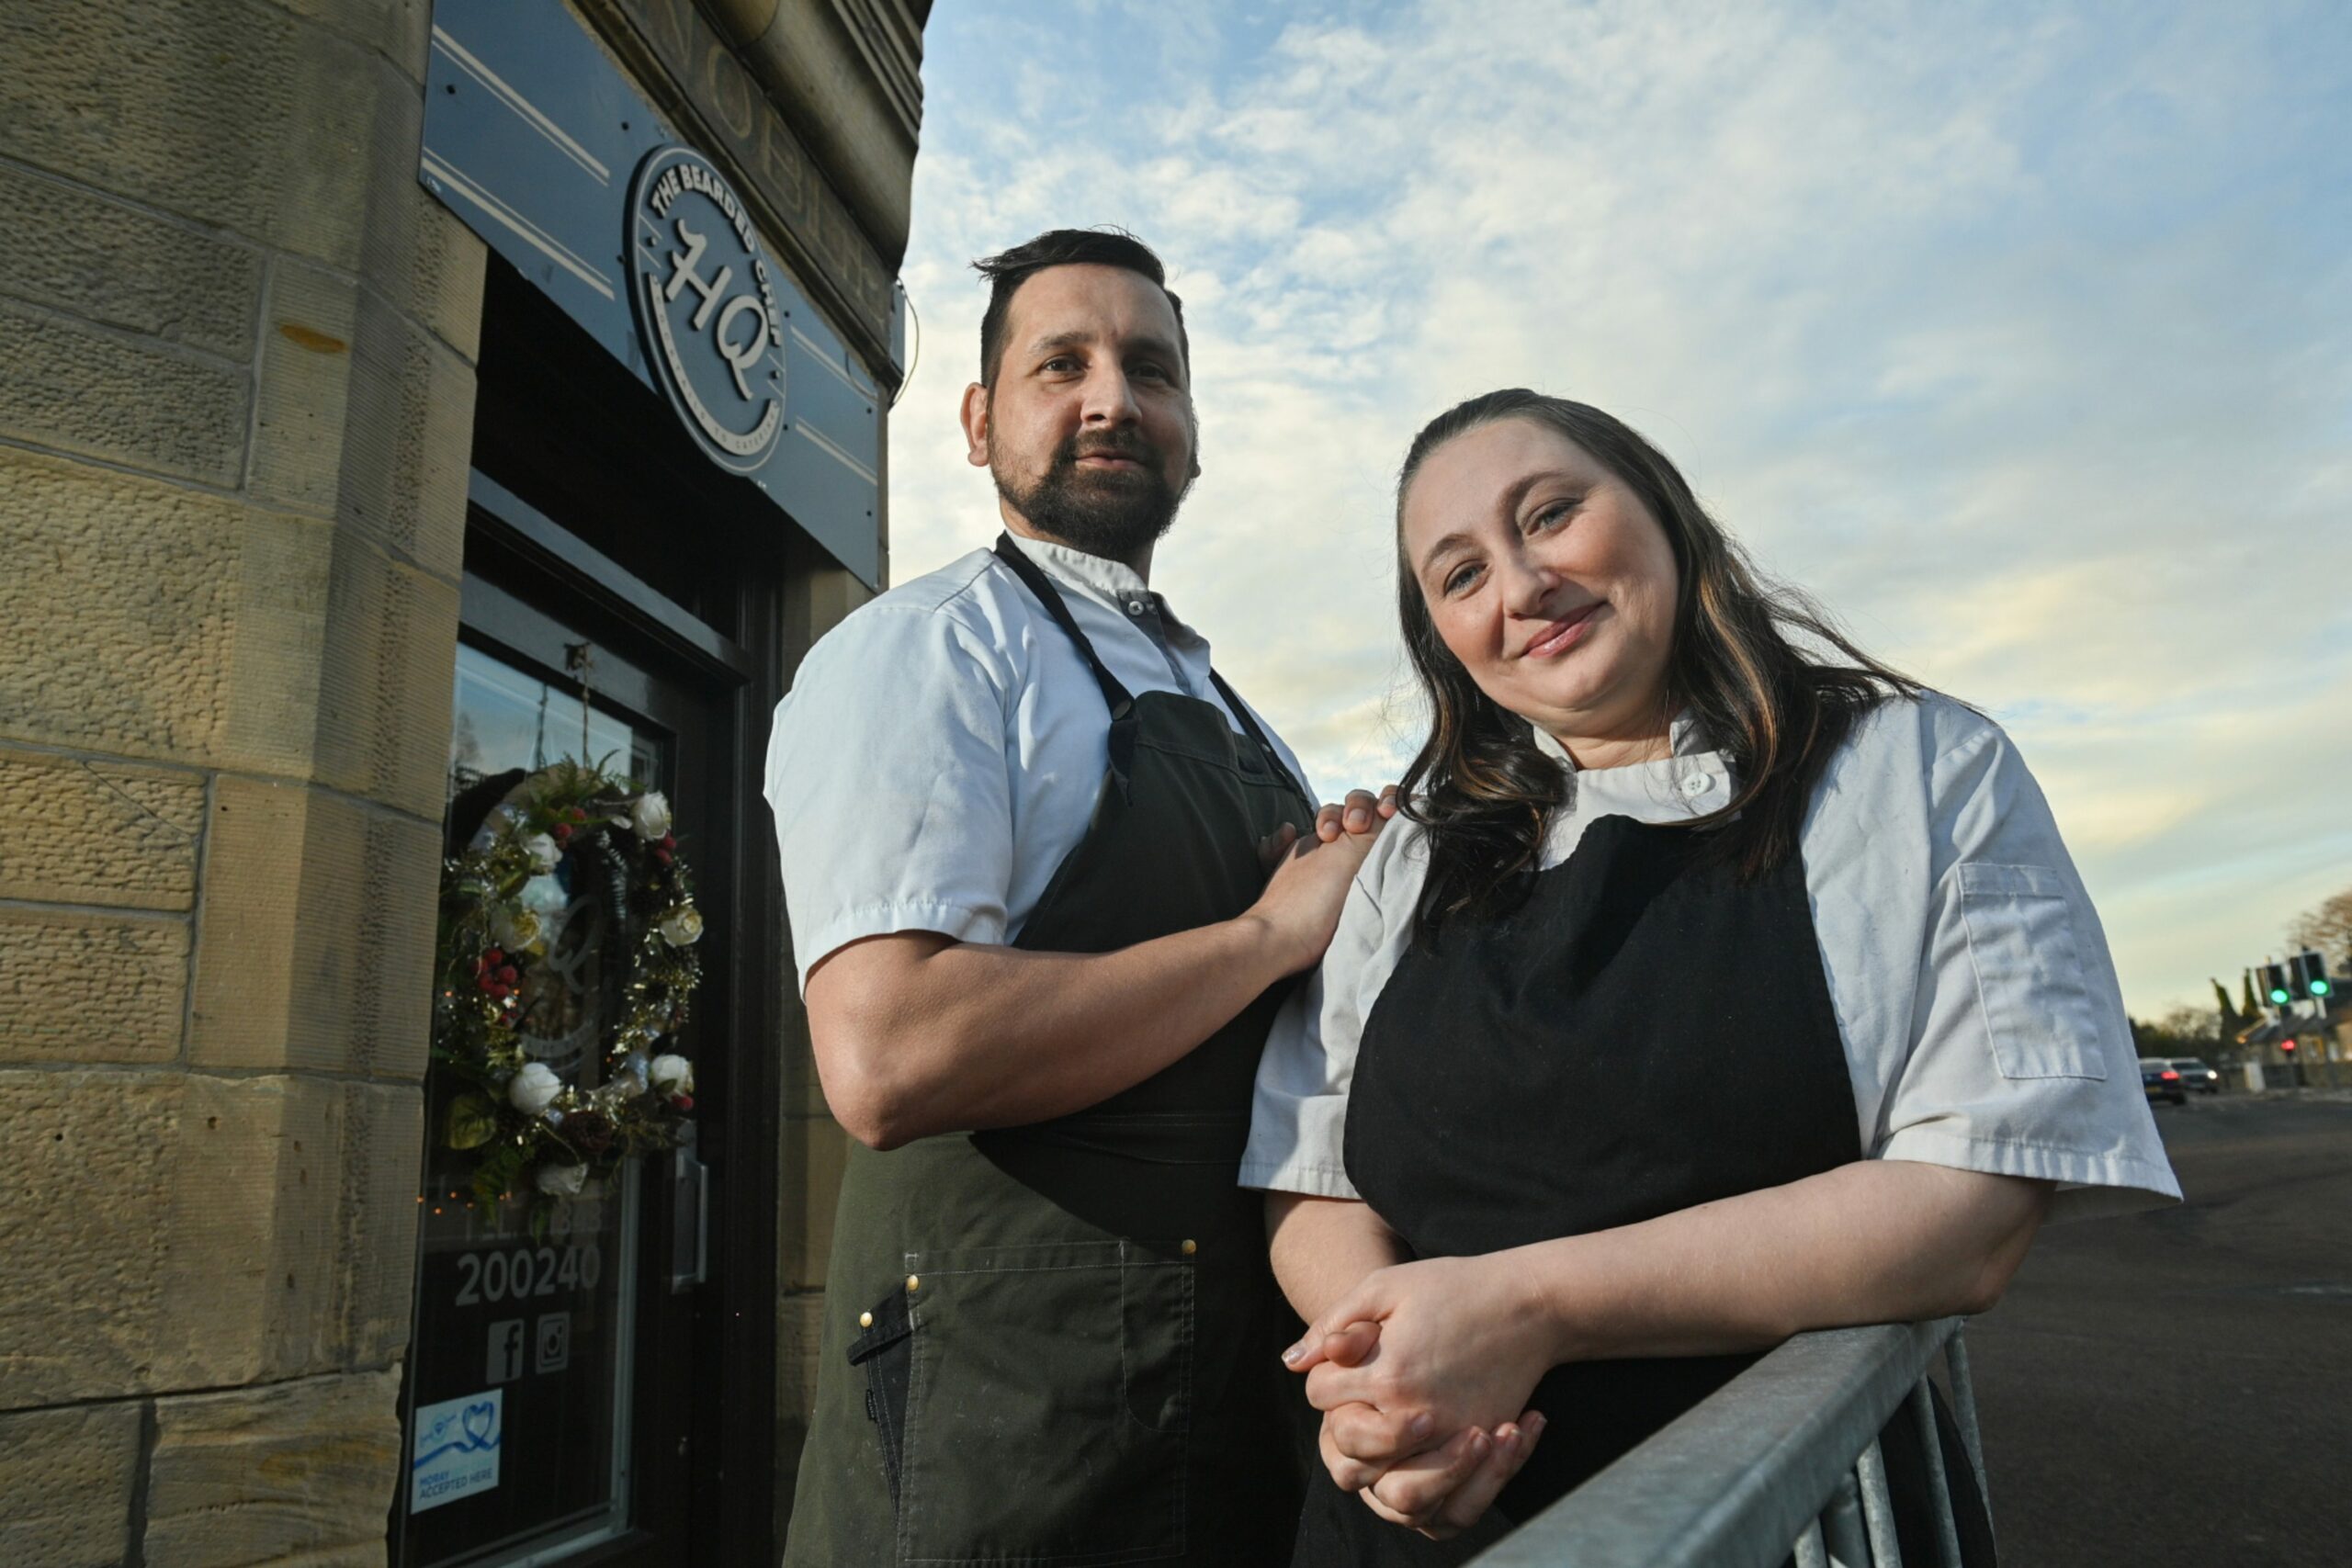 Owners Aaron Judge and his wife, Kayleigh are pictured at their premises at the Bearded Chef restaurant in Elgin.